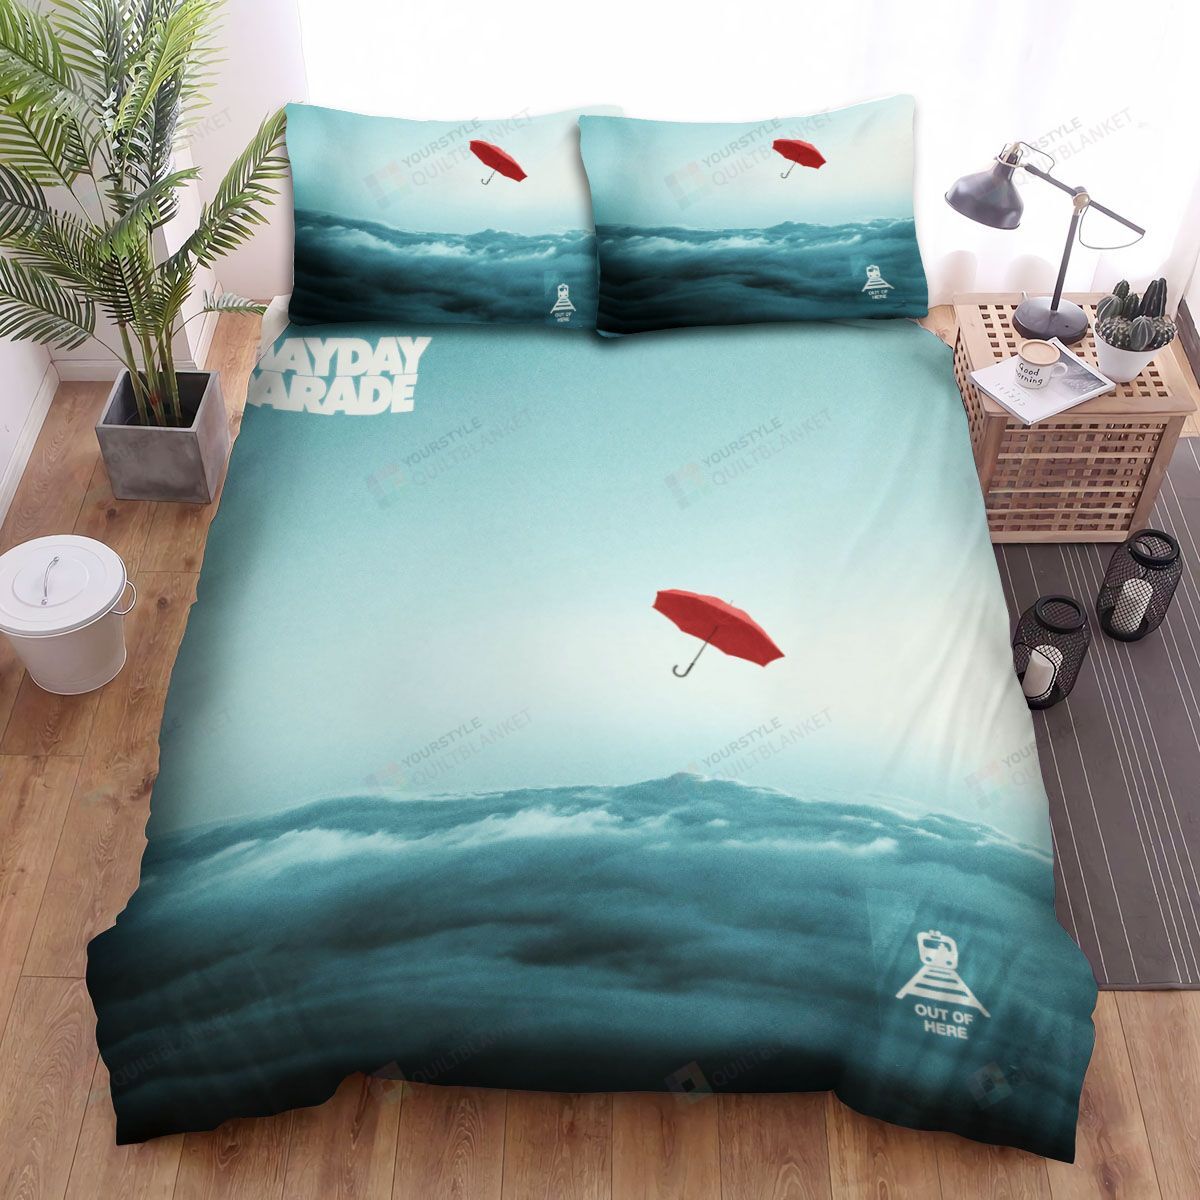 Mayday Parade Red Umbrella Bed Sheets Spread Comforter Duvet Cover Bedding Sets